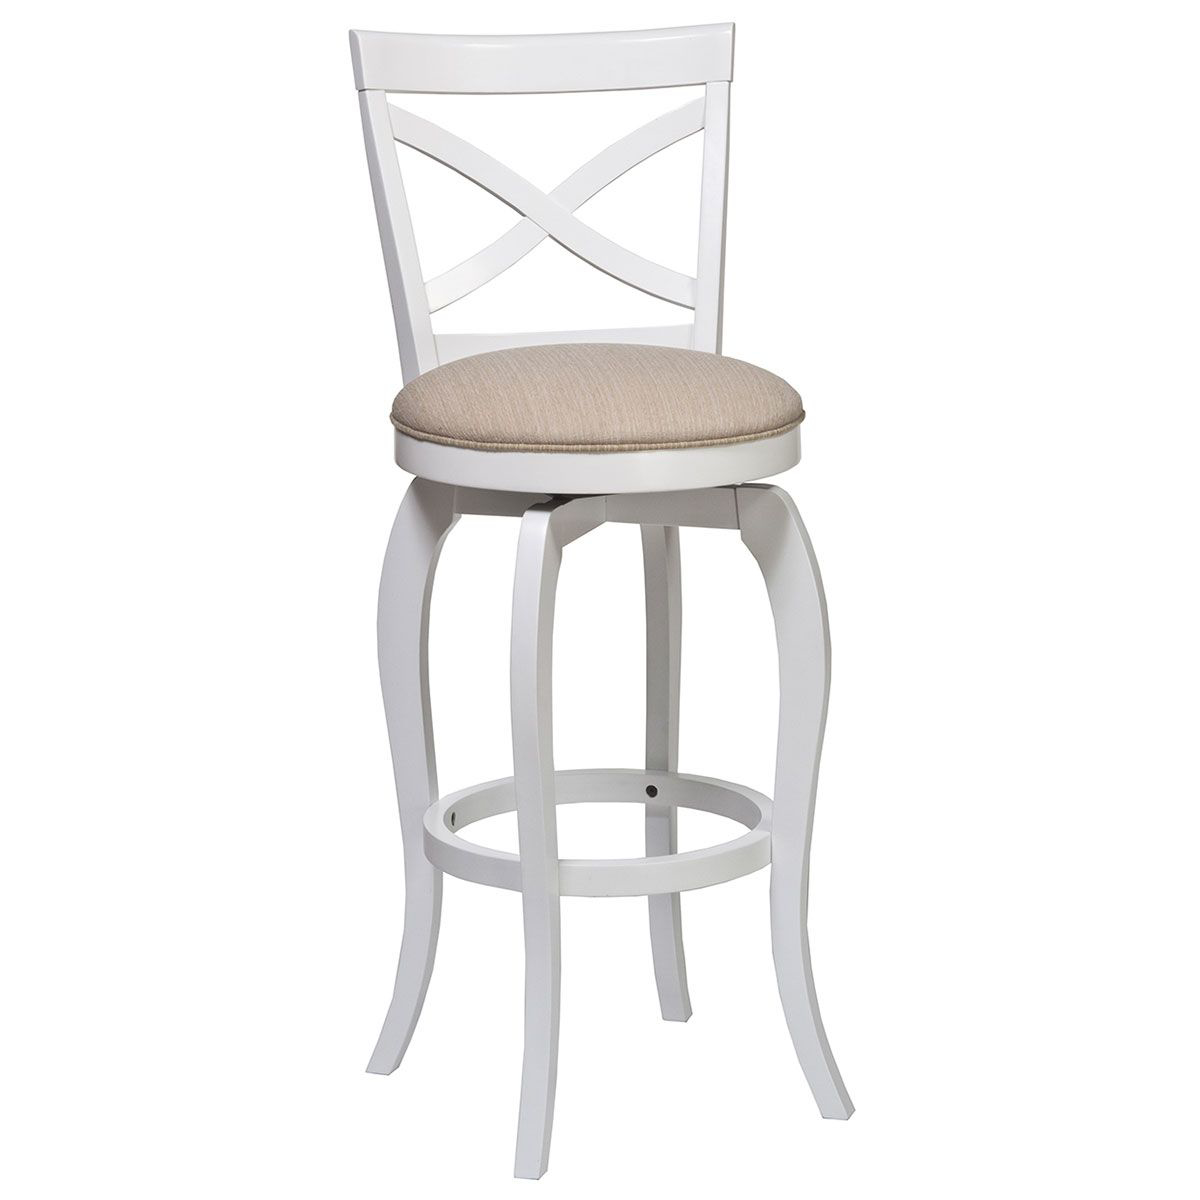 Picture of ELLENDALE WHT SW COUNTER STOOL